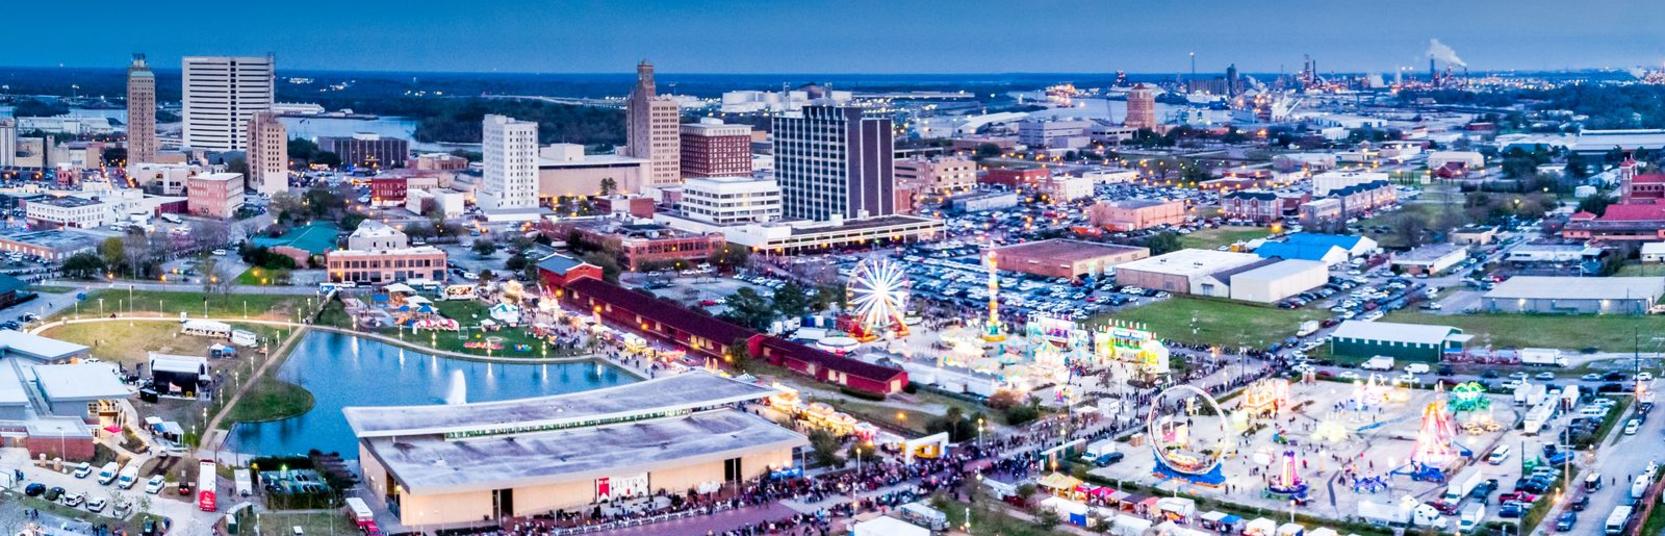 Aerial view of downtown Beaumont